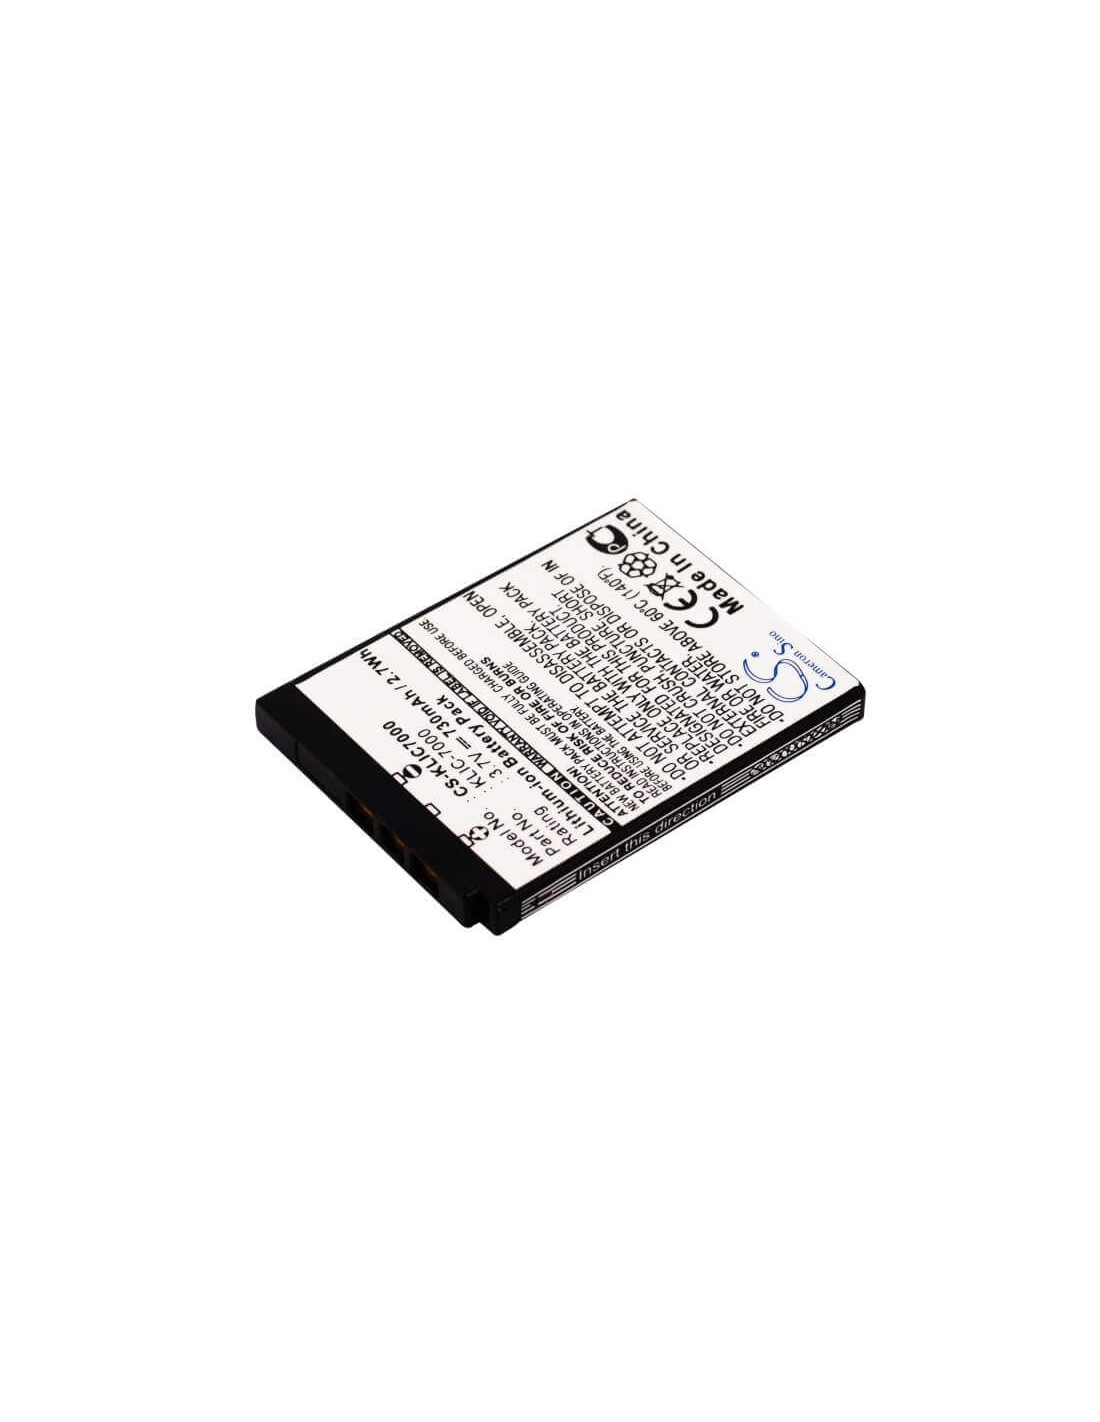 Battery for Oucca Dc-a1200, Dc-t300, T-1200 3.7V, 730mAh - 2.70Wh